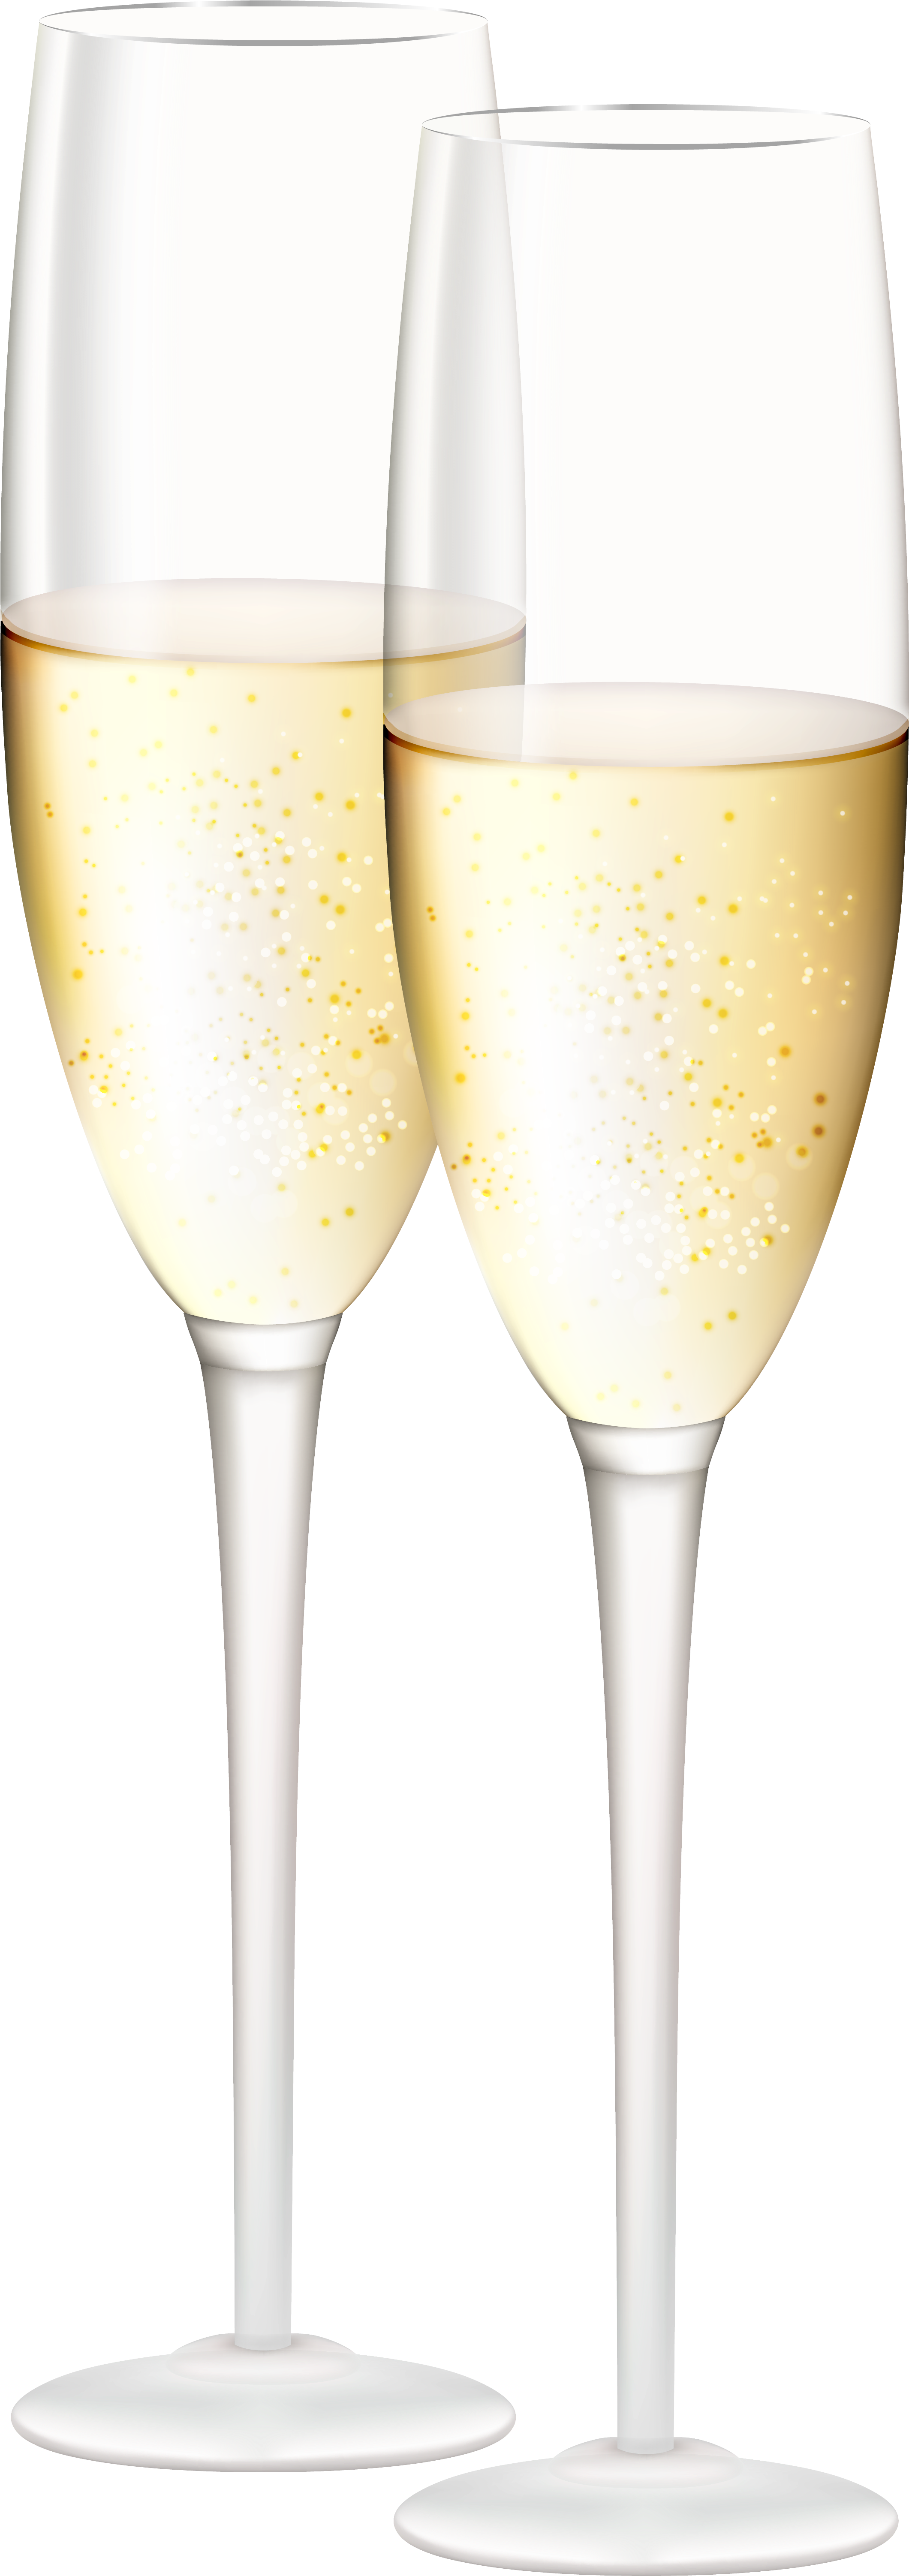 Champagne Glasses Png Clipart - Clear champagne flute glass, champagne ...